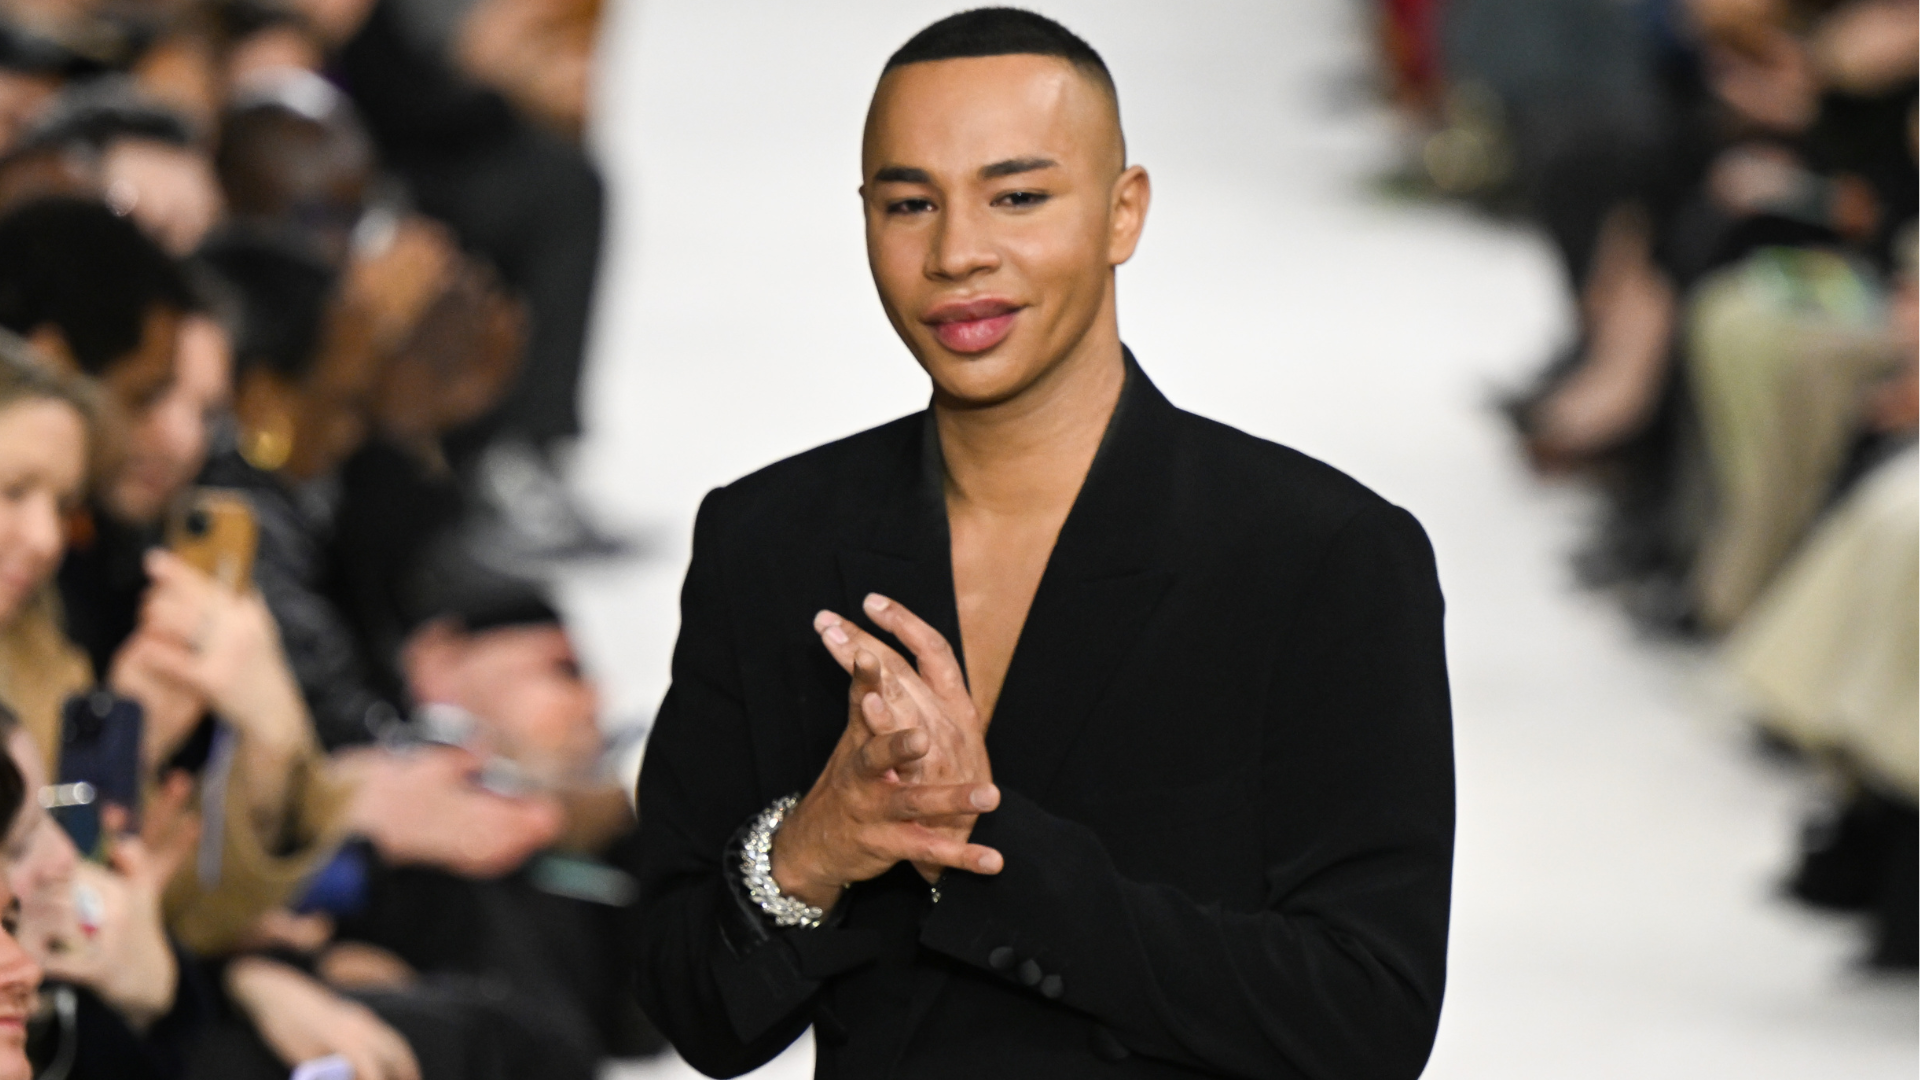 Olivier Rousteing: A Perpetual Dreamer